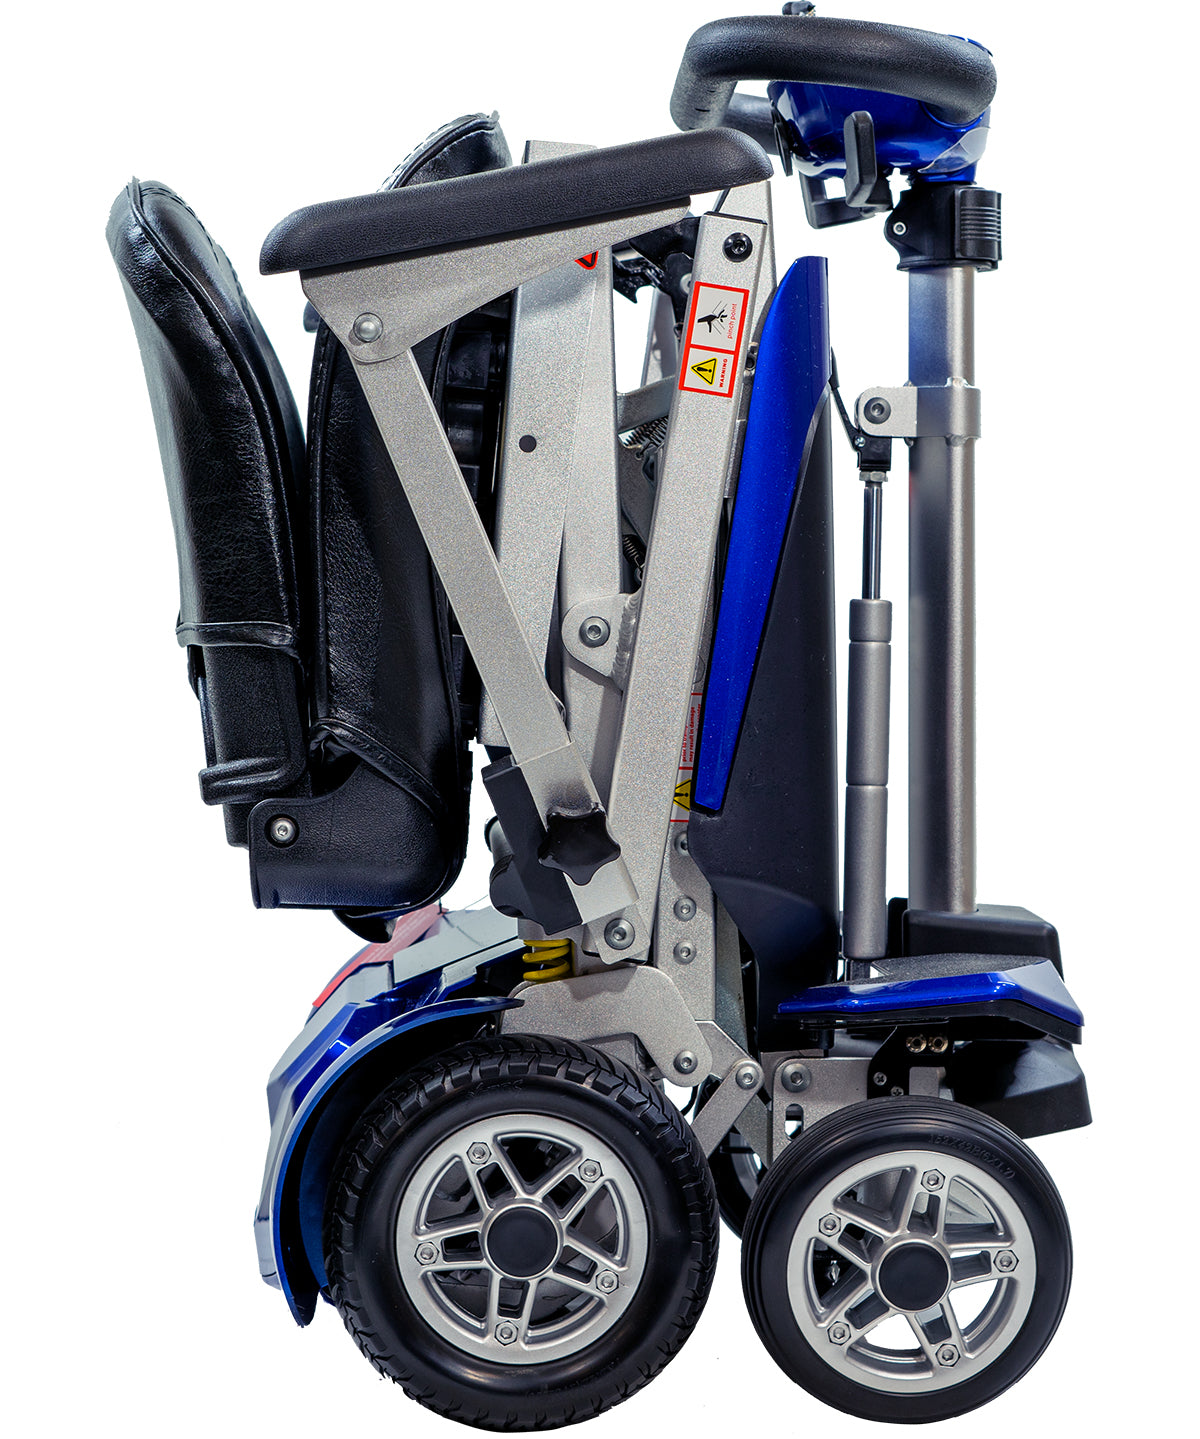 Transformer 2 - 4-Wheel Automatic Folding Mobility Scooter